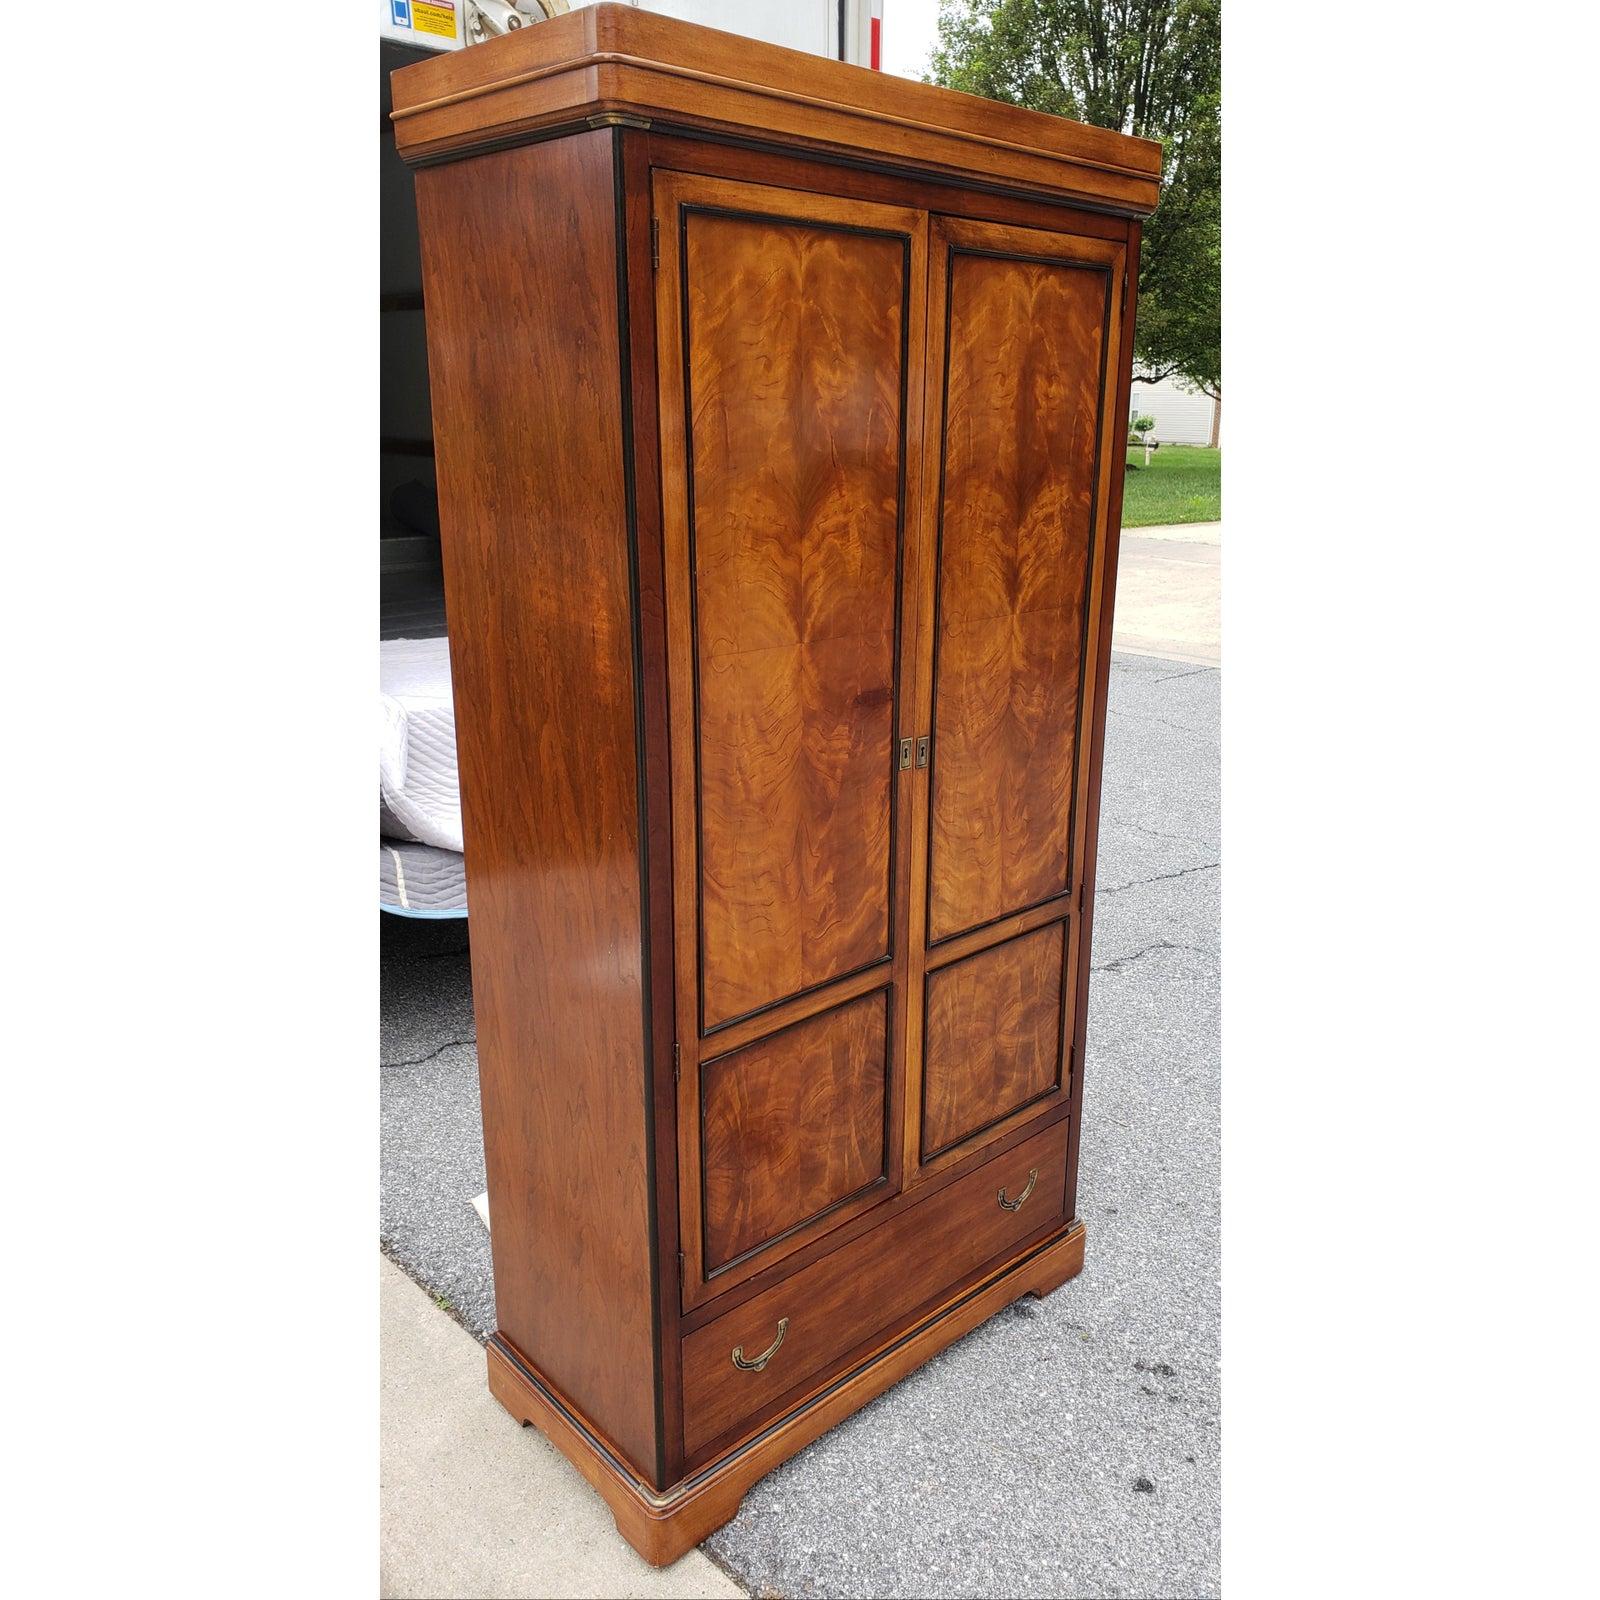 This beautiful National Mount Airy Furniture vintage armoire is made out of solid walnut, flame walnut and satinwood inlays. This armoire features a bottom drawers with sleek drop down pulls. Top part has 2 shelves and multiples drawers and cubbies.